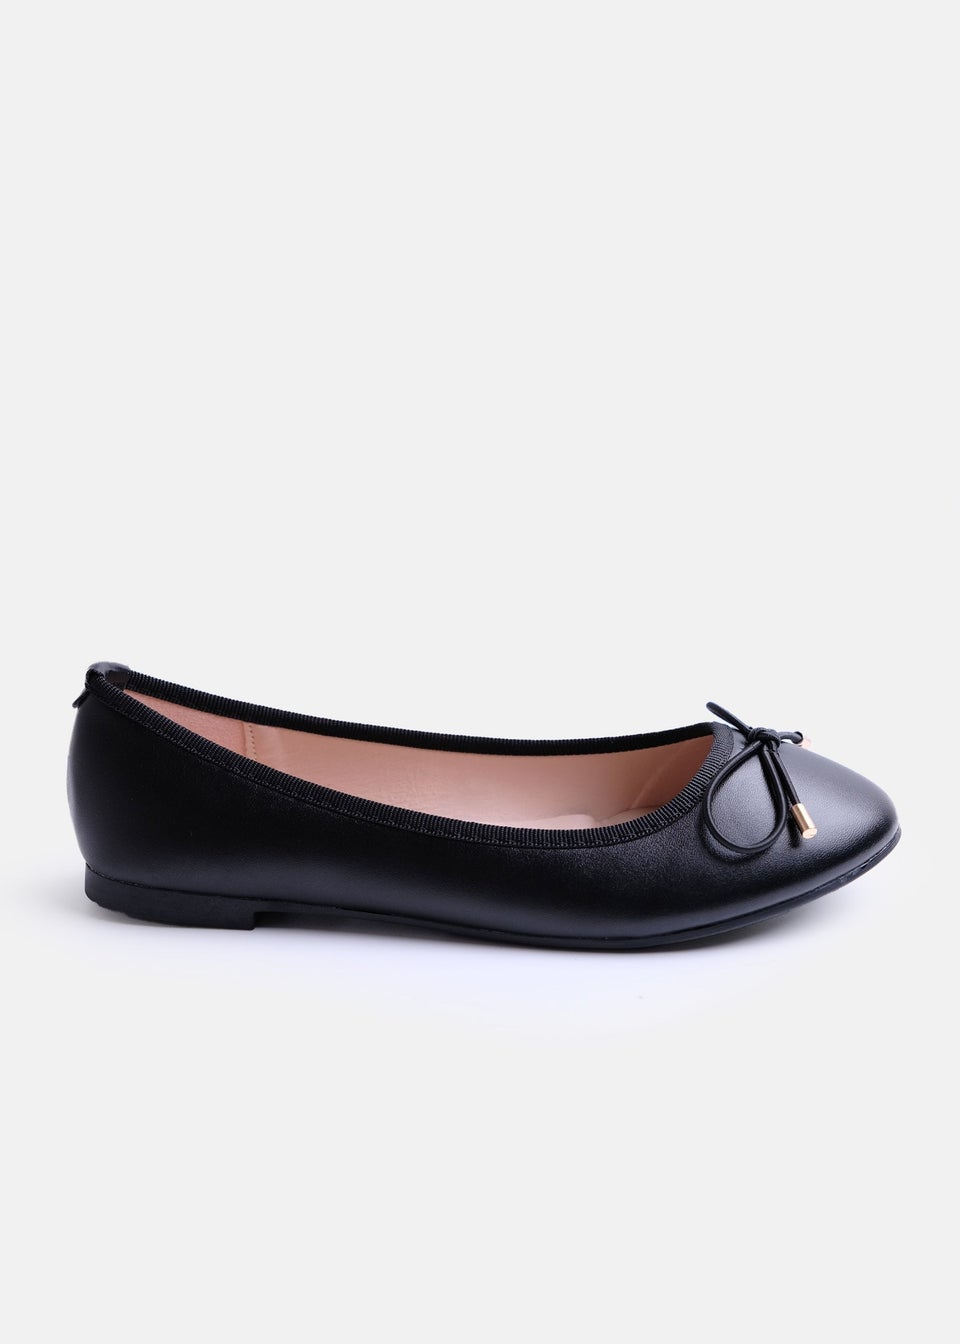 Where's That From Black Tallulah Wide Fit PU Flat Pumps